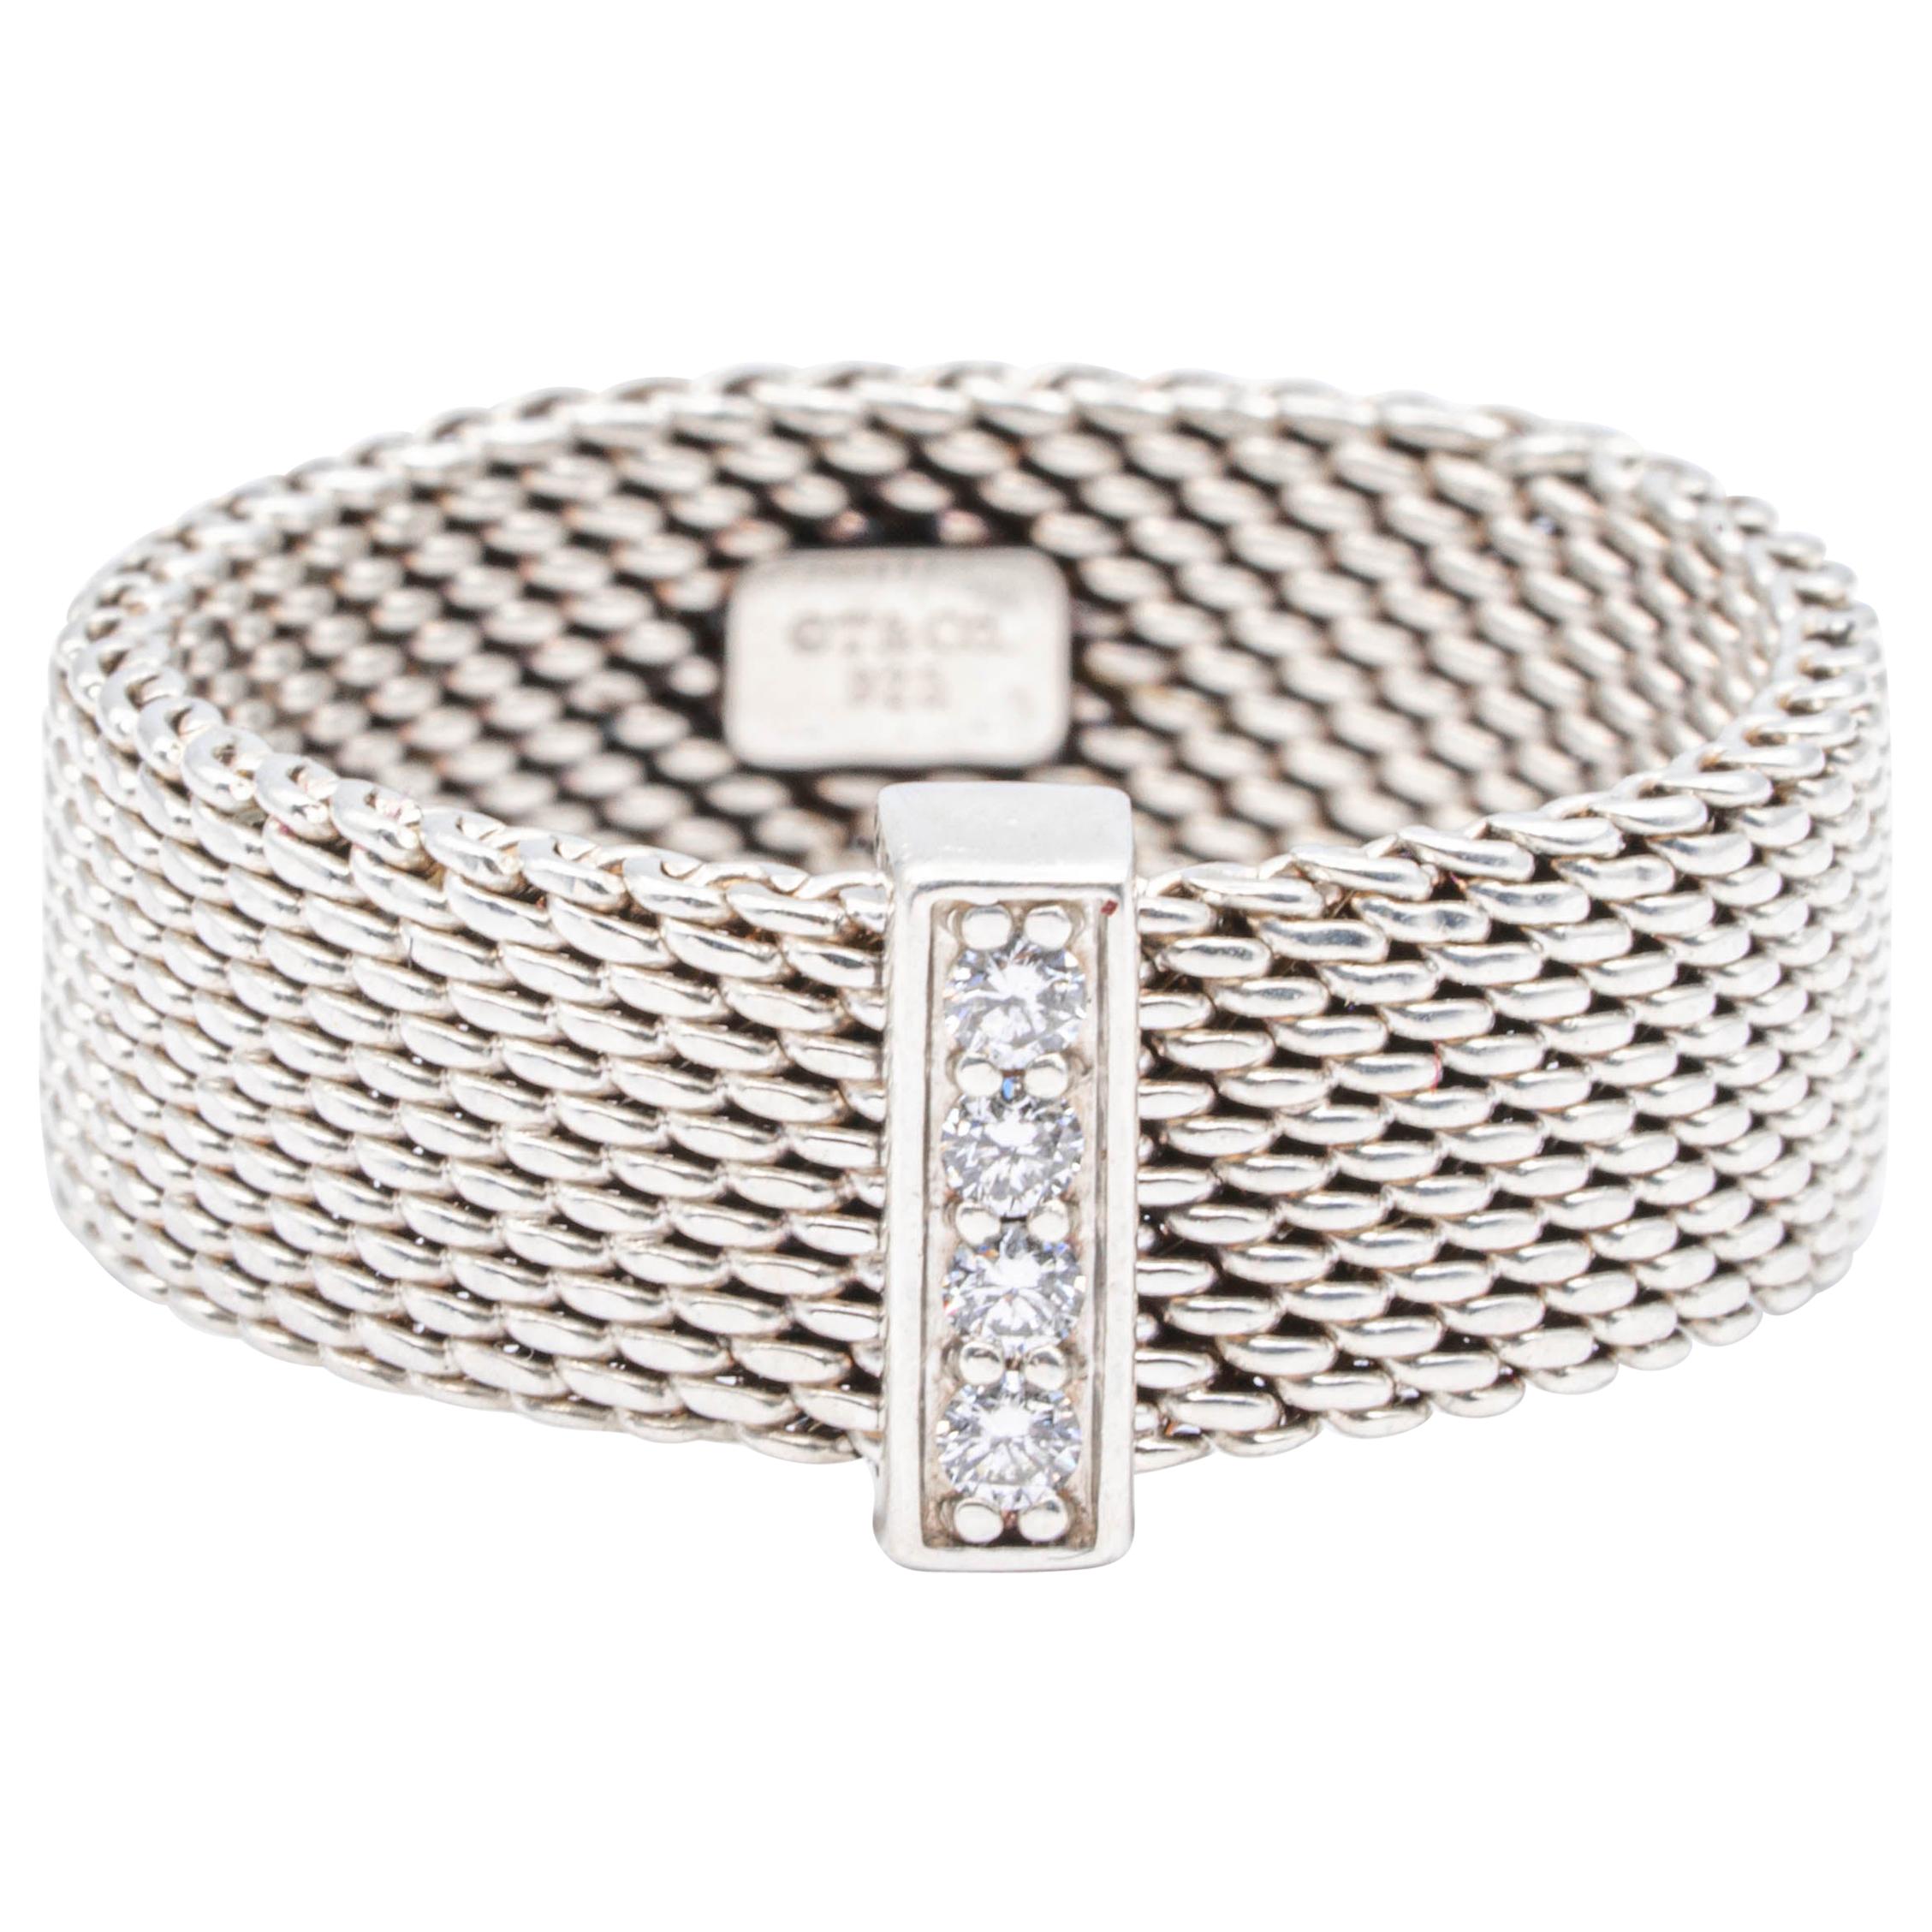 Tiffany & Co. Silver Mesh Somerset Band Ring with 4 Diamonds